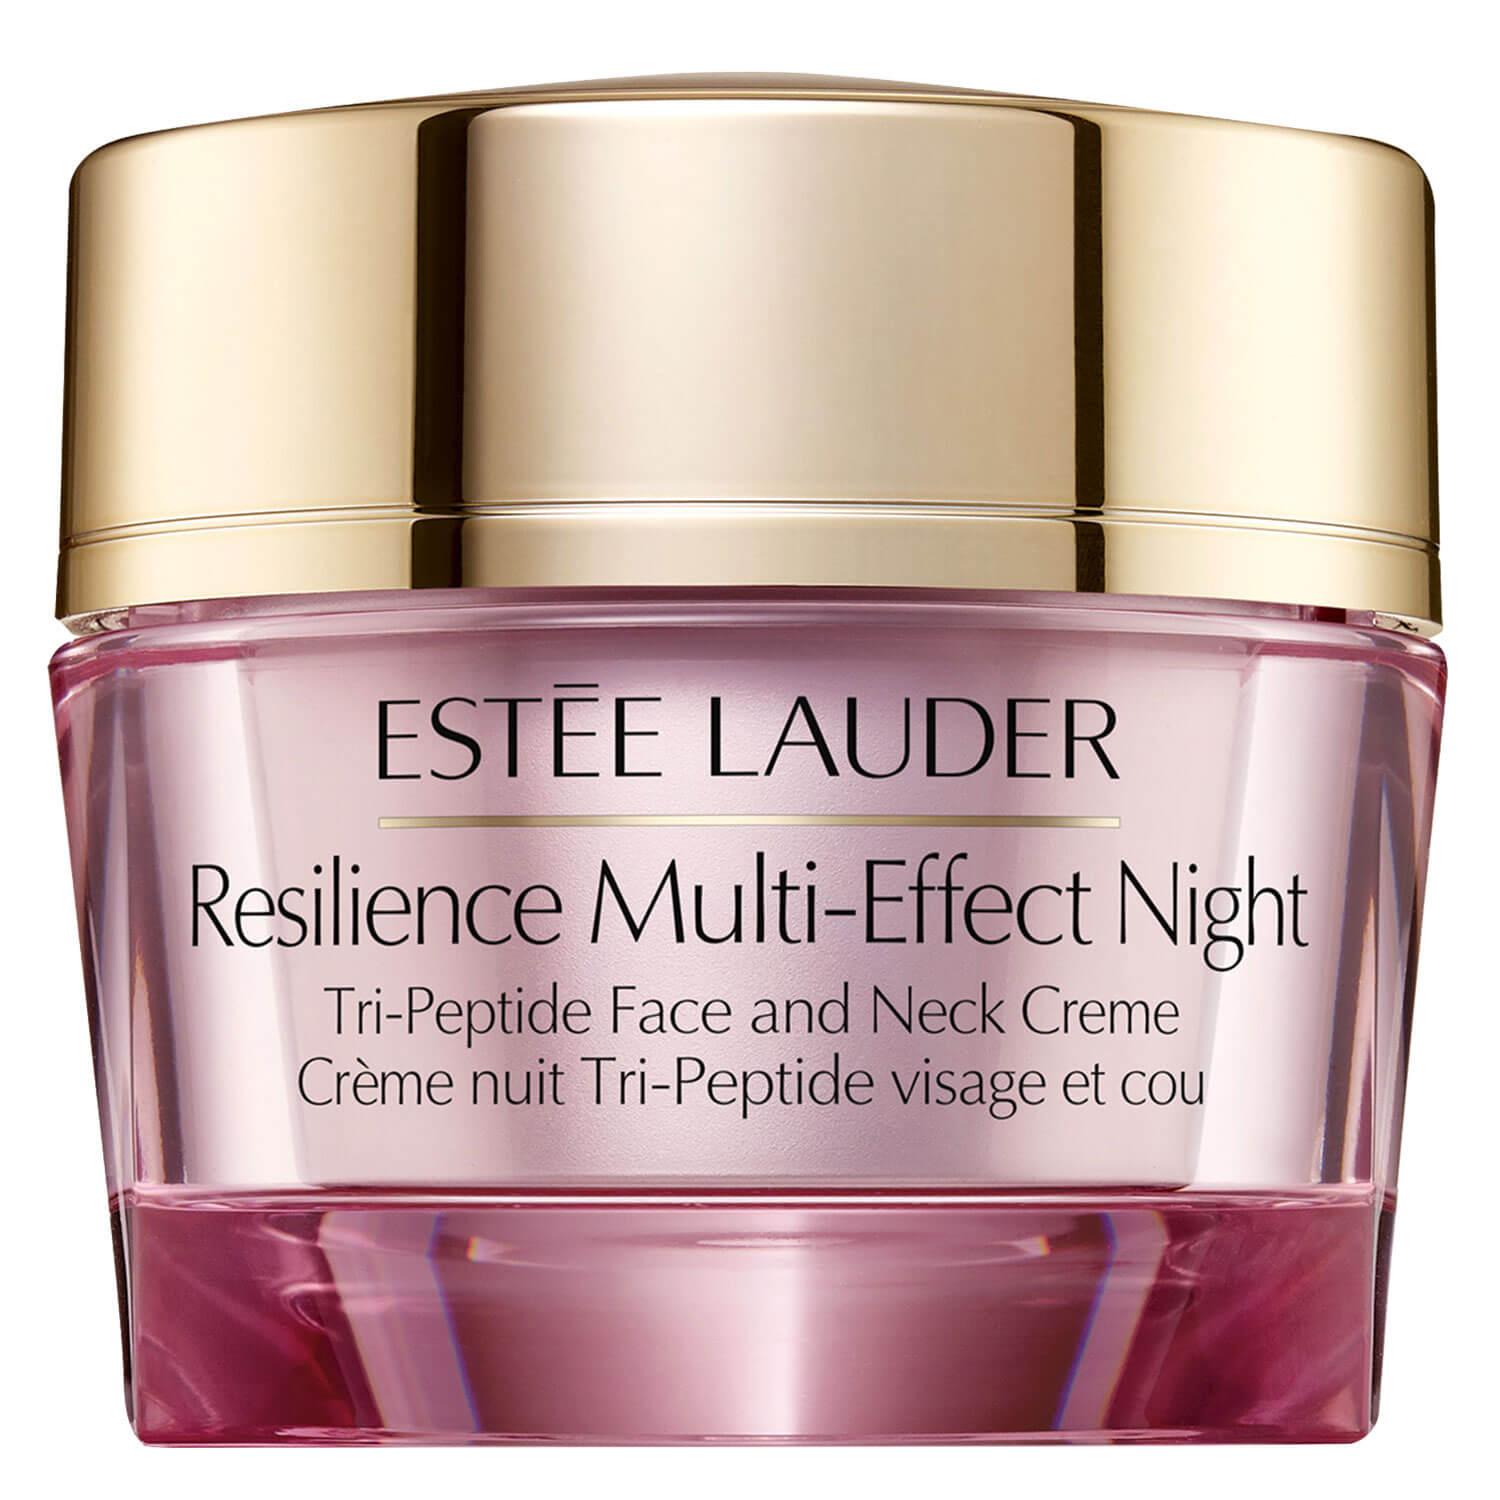 Resilience Multi-Effect - Tri-Peptide Face and Neck Creme Night 